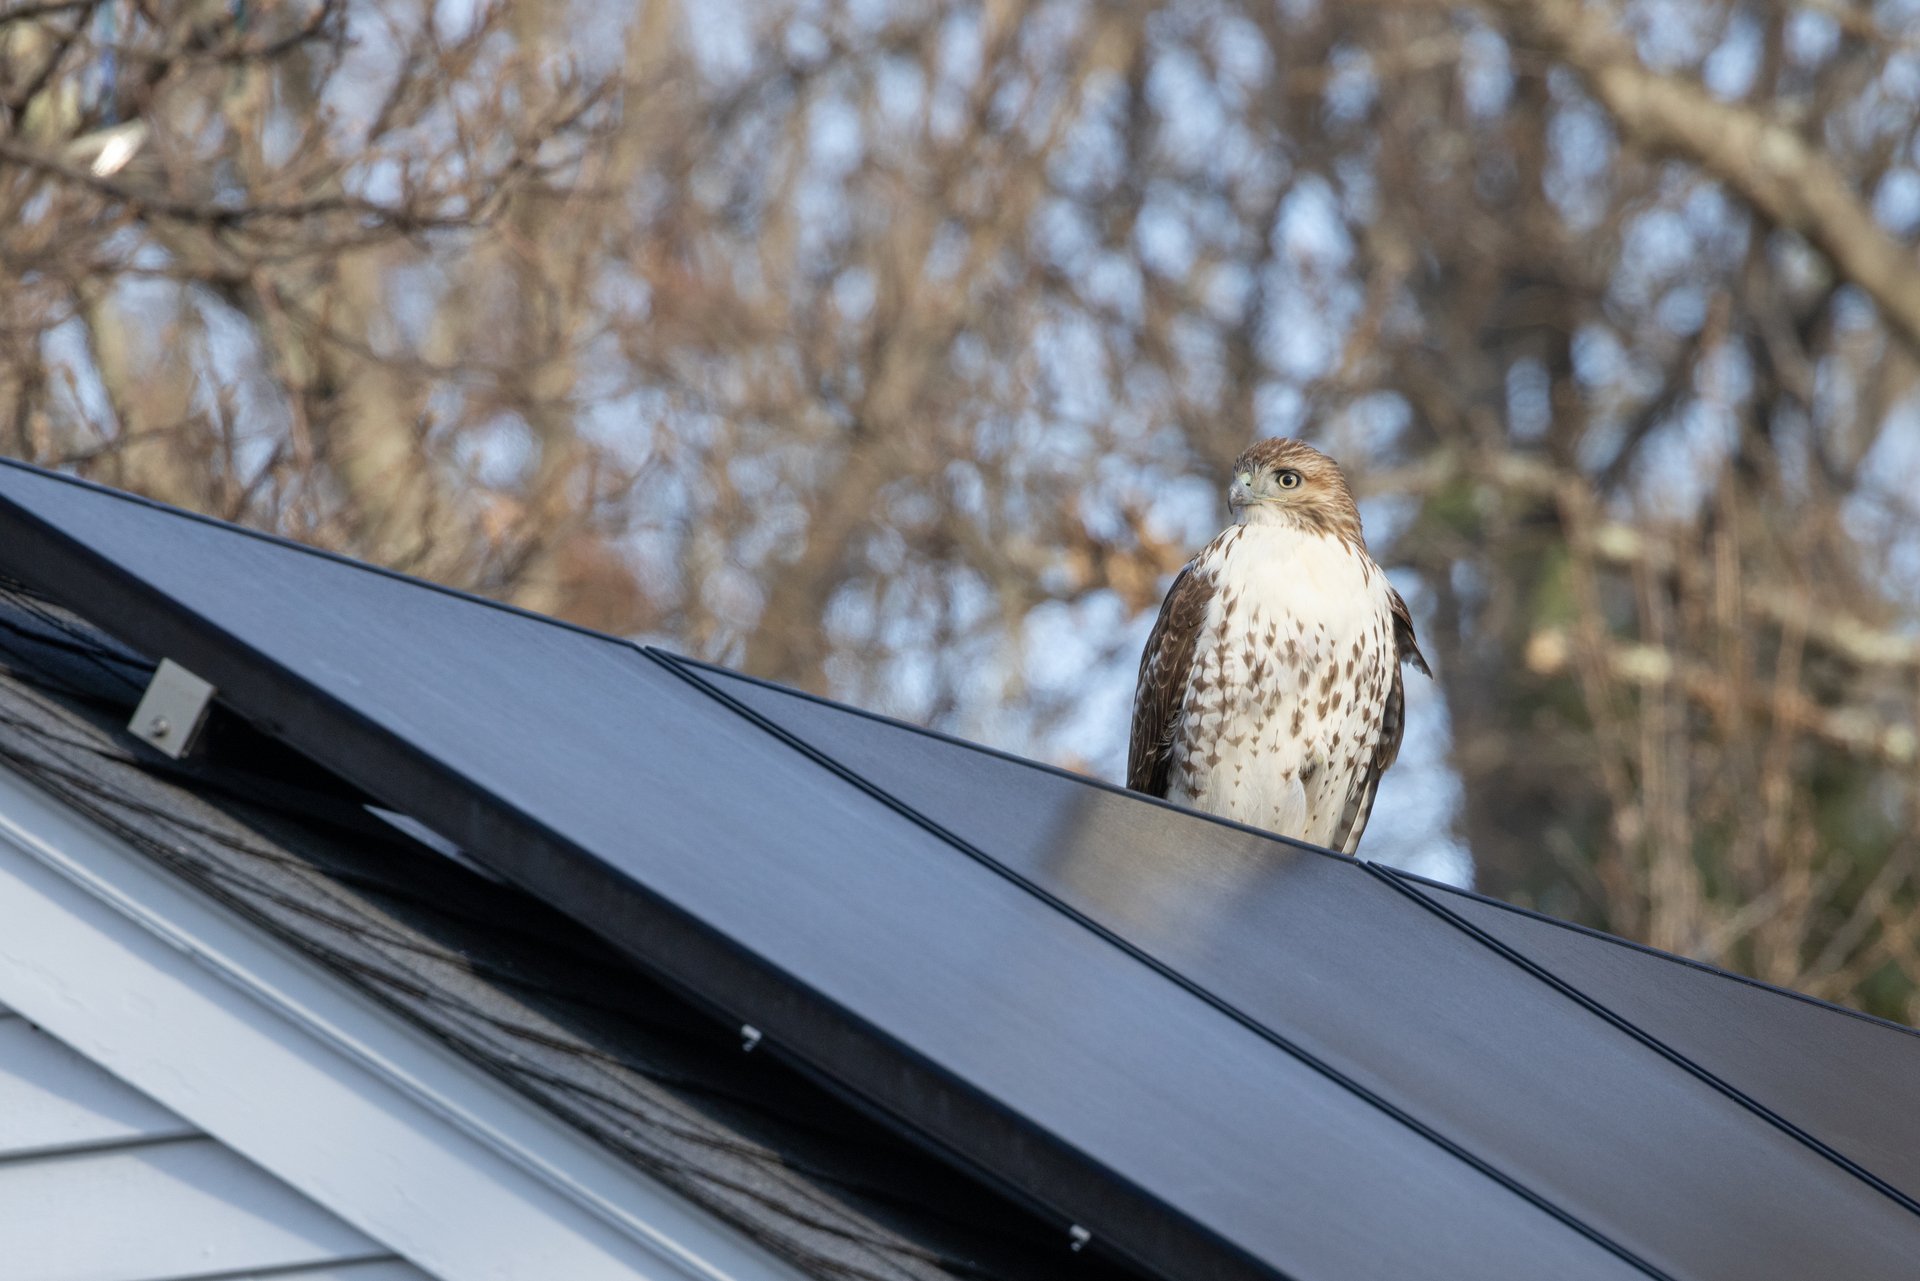 A hawk perches on a rooftop solar panel, with tree branches in the background